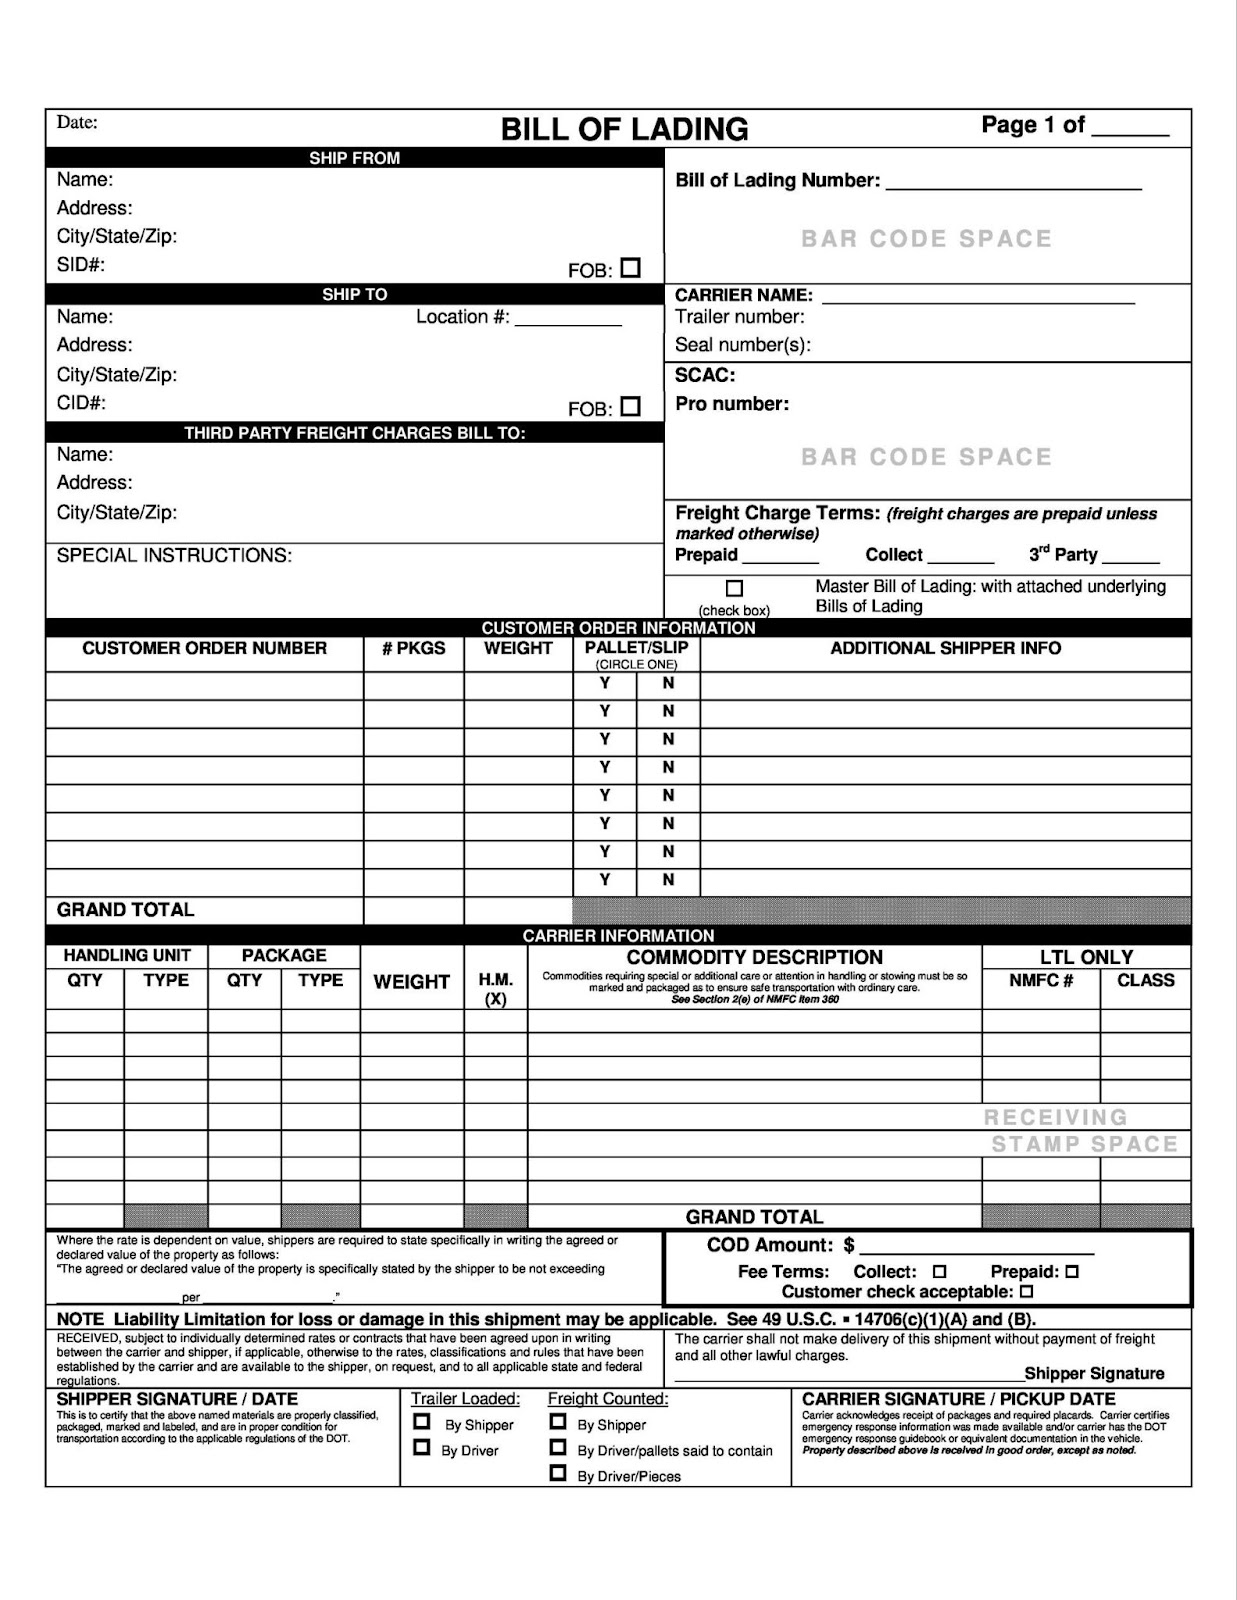 A Bill of Lading PDF document featuring fields for shipper and consignee information, cargo/product details, carrier information, special instructions, and signature lines. 